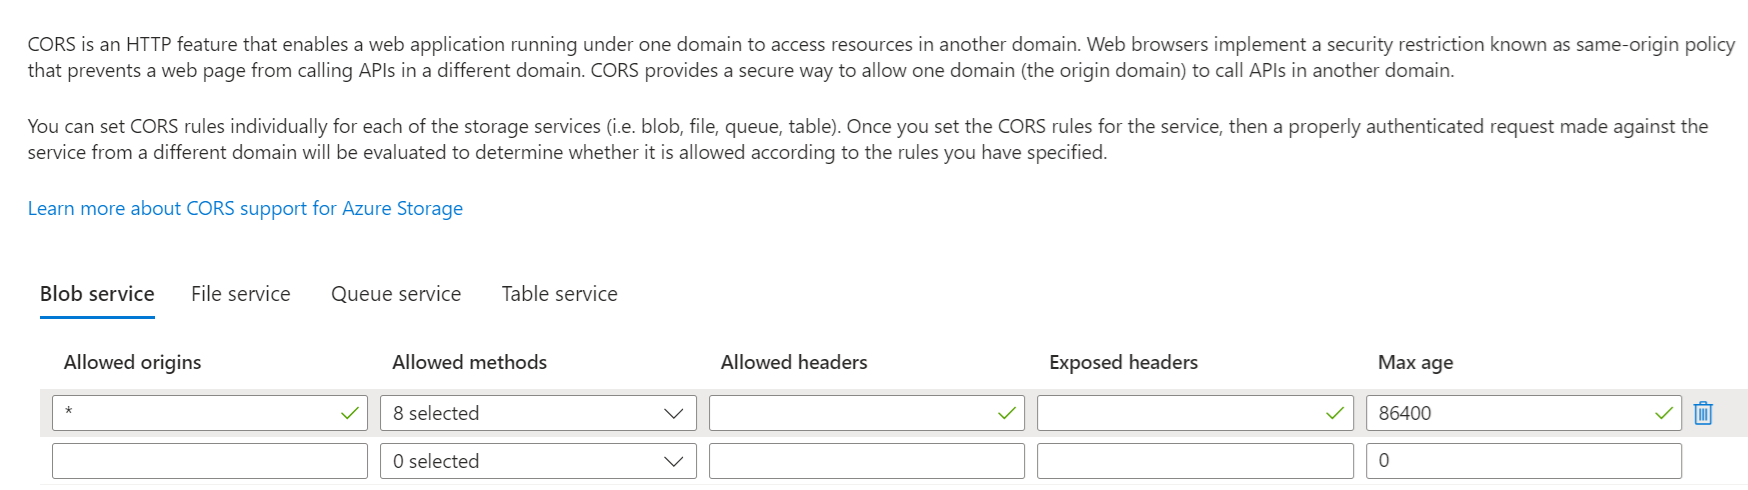 Screenshot shows the Resource sharing page for Blob service configuration.